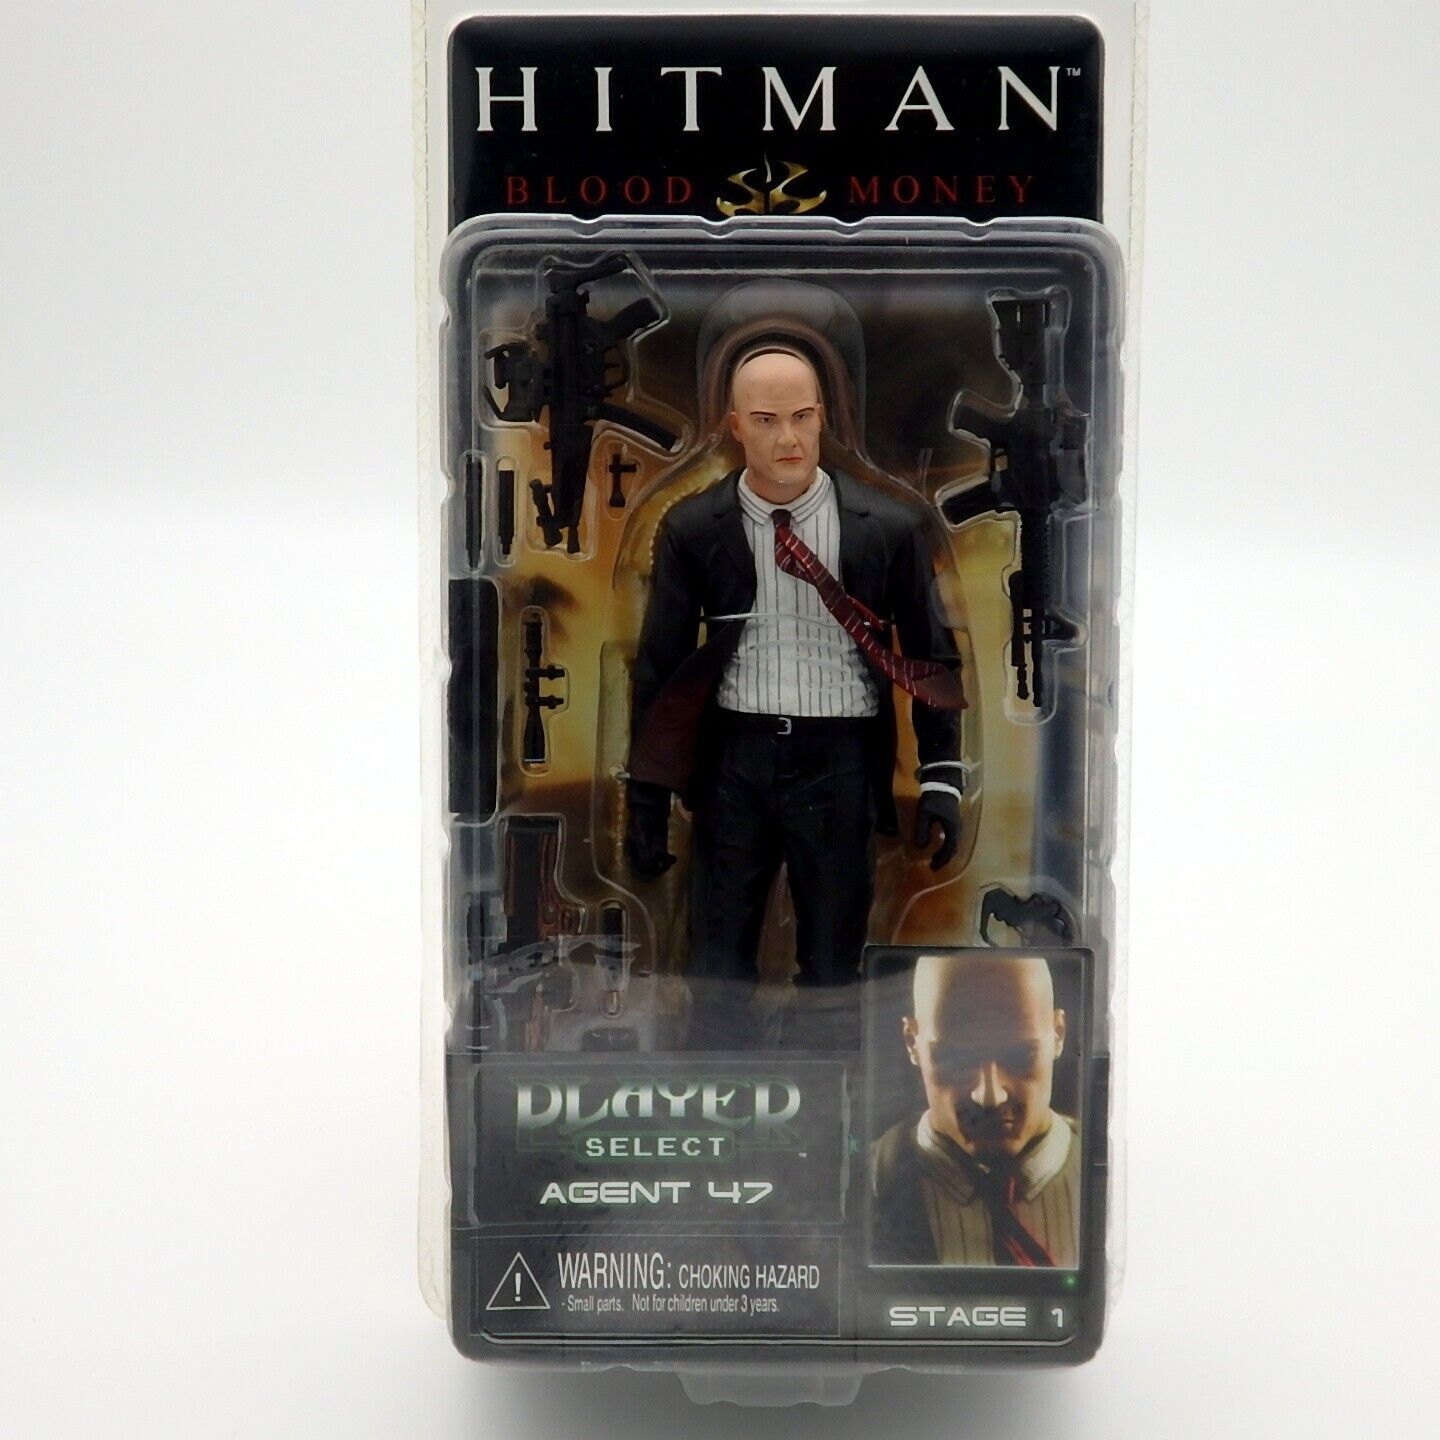 Neca Reel Toys Hitman Player Select Series Agent 47 Action Figure